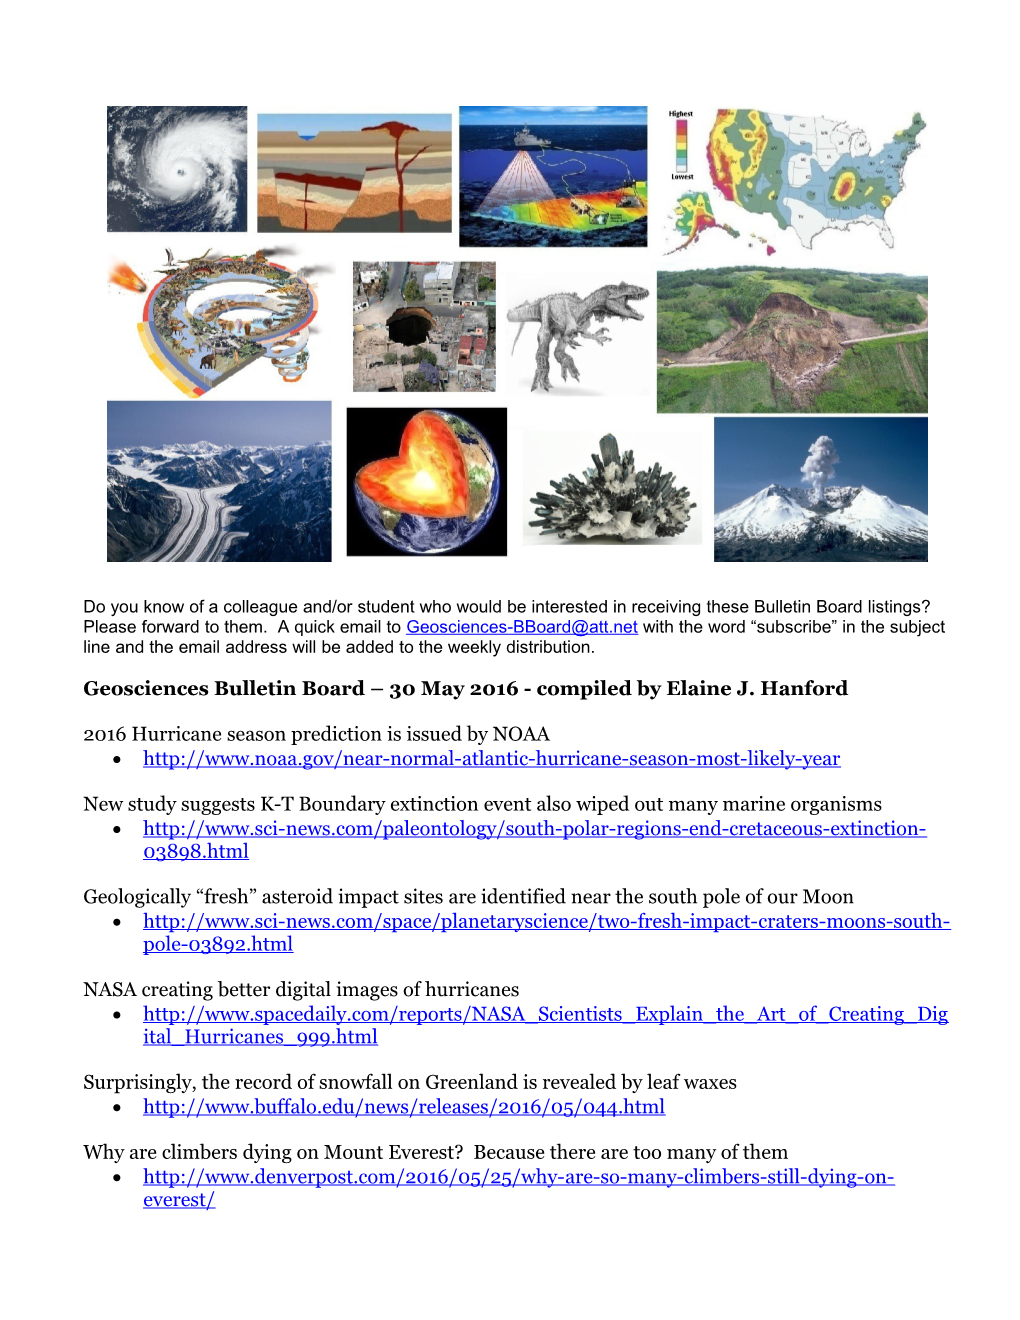 Geosciences Bulletin Board 30 May 2016- Compiled by Elaine J. Hanford